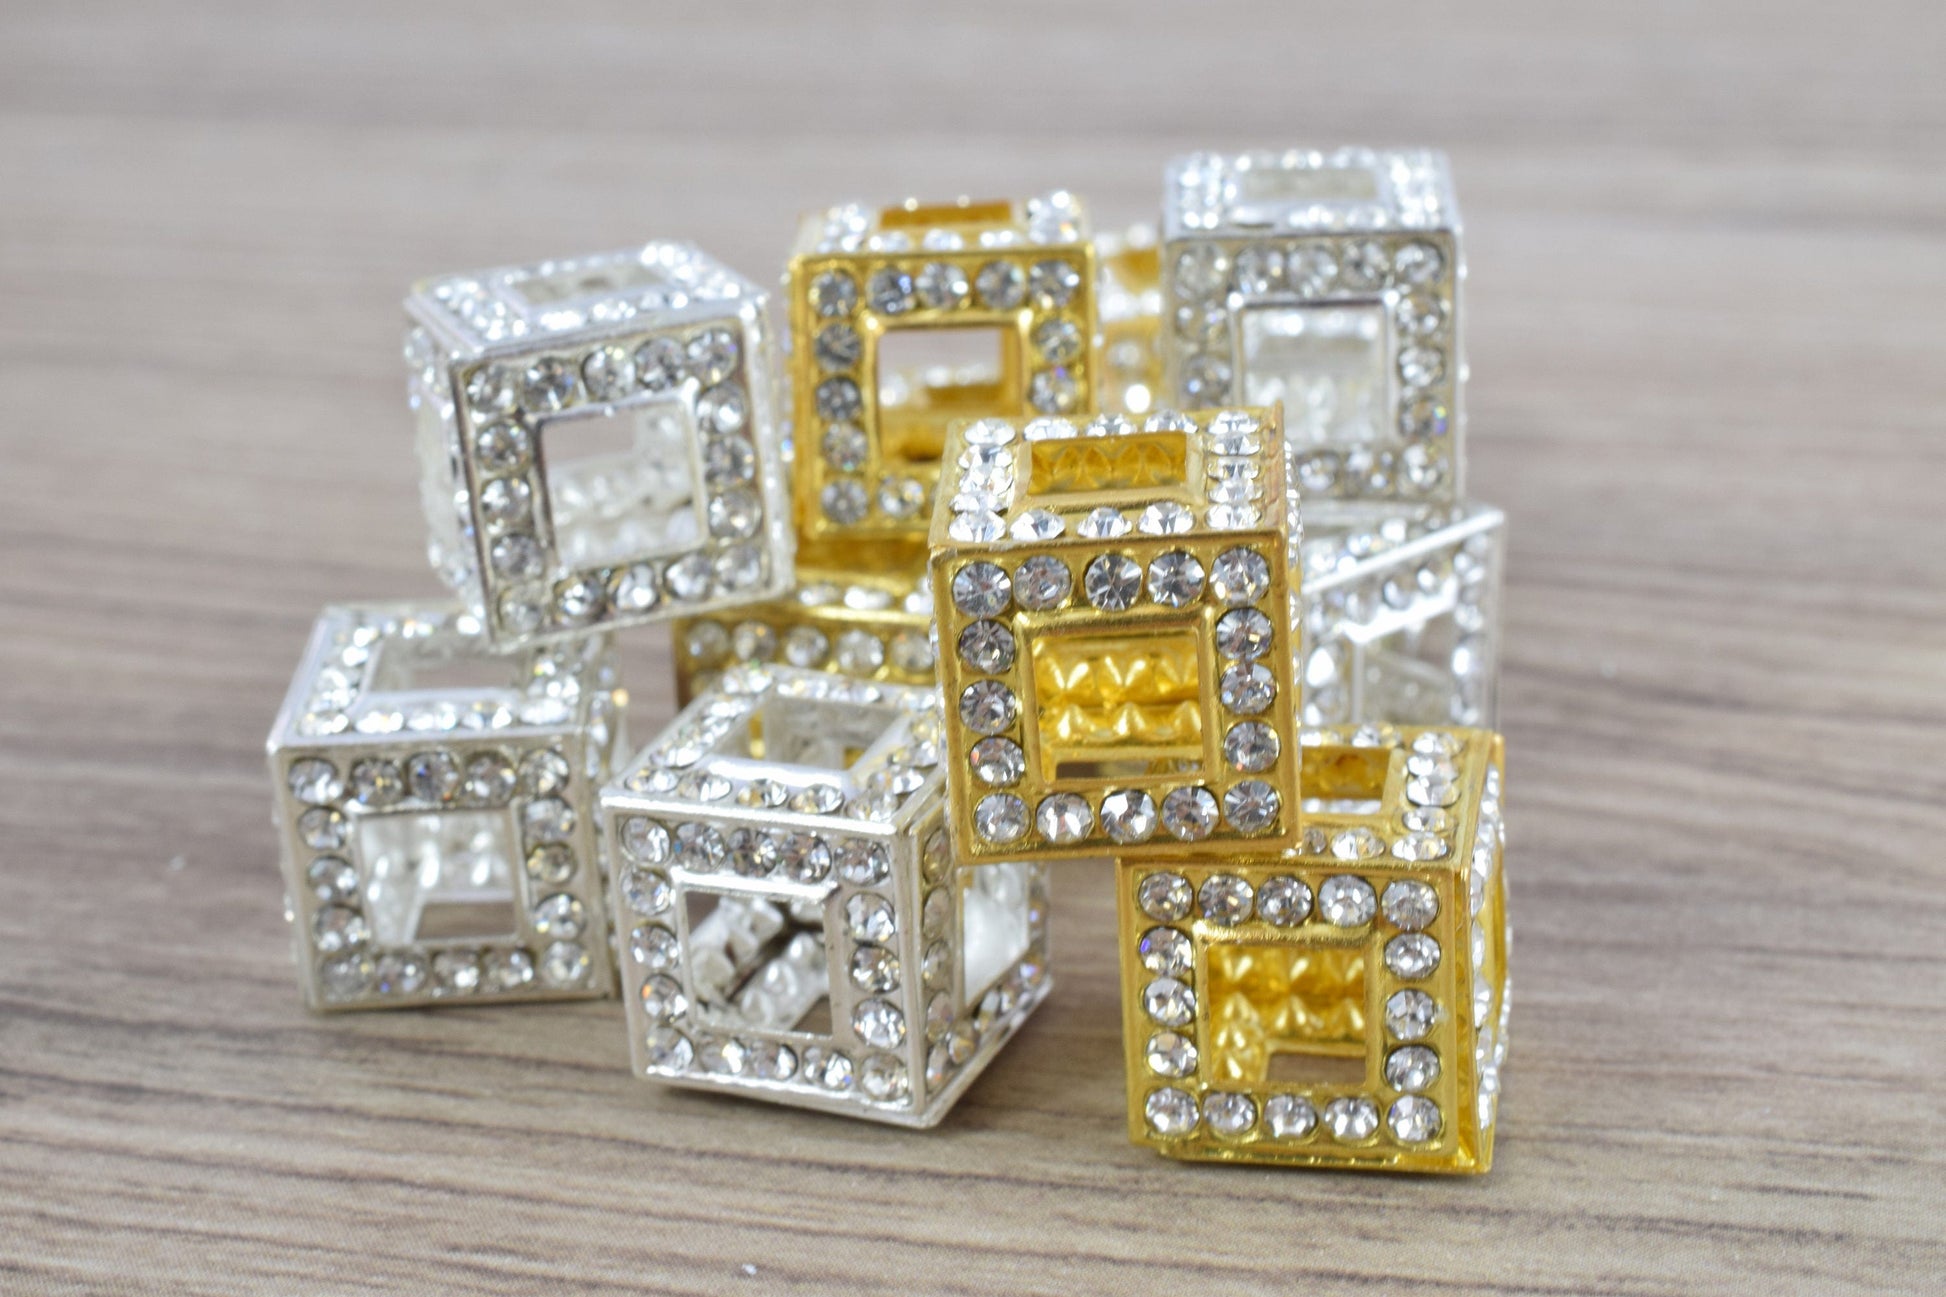 14mm Crystal Rhinestone Pave Big Hole Square Cube Spacer Beads,6 PCs for Jewelry Making, Craft Supplies, Tools,Findings, Crystal,Rhinestones